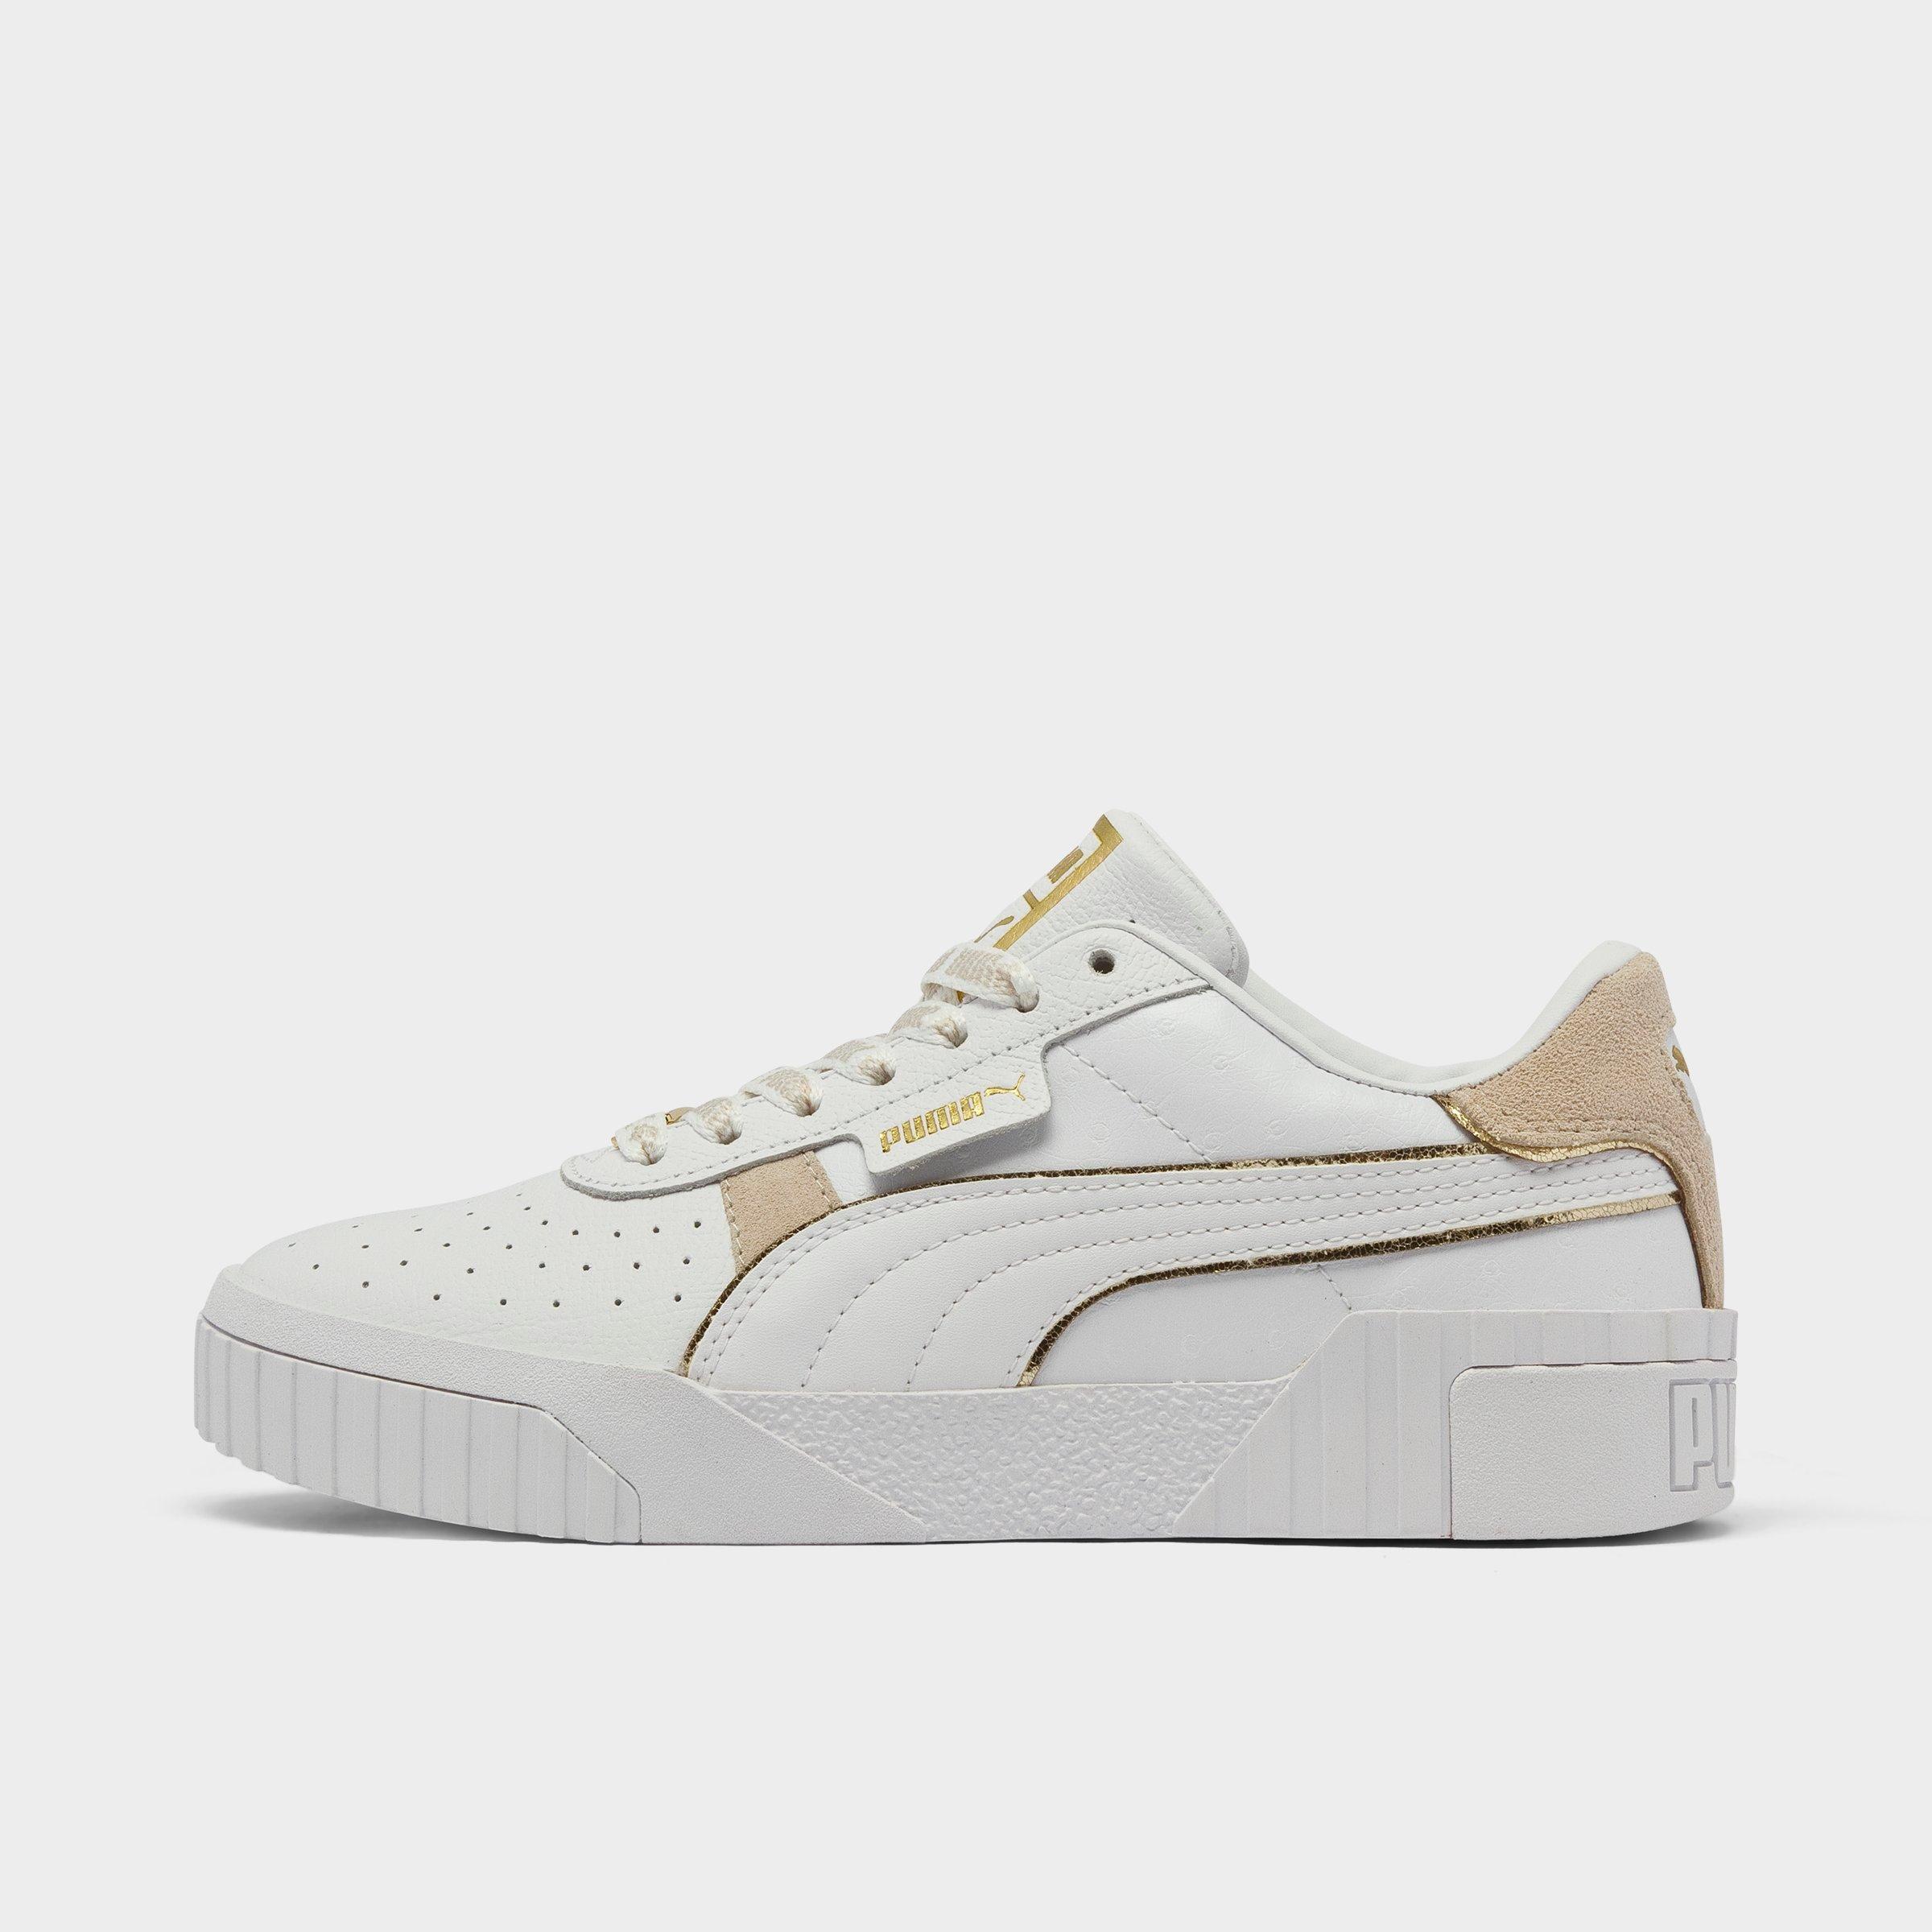 white pumas with gold